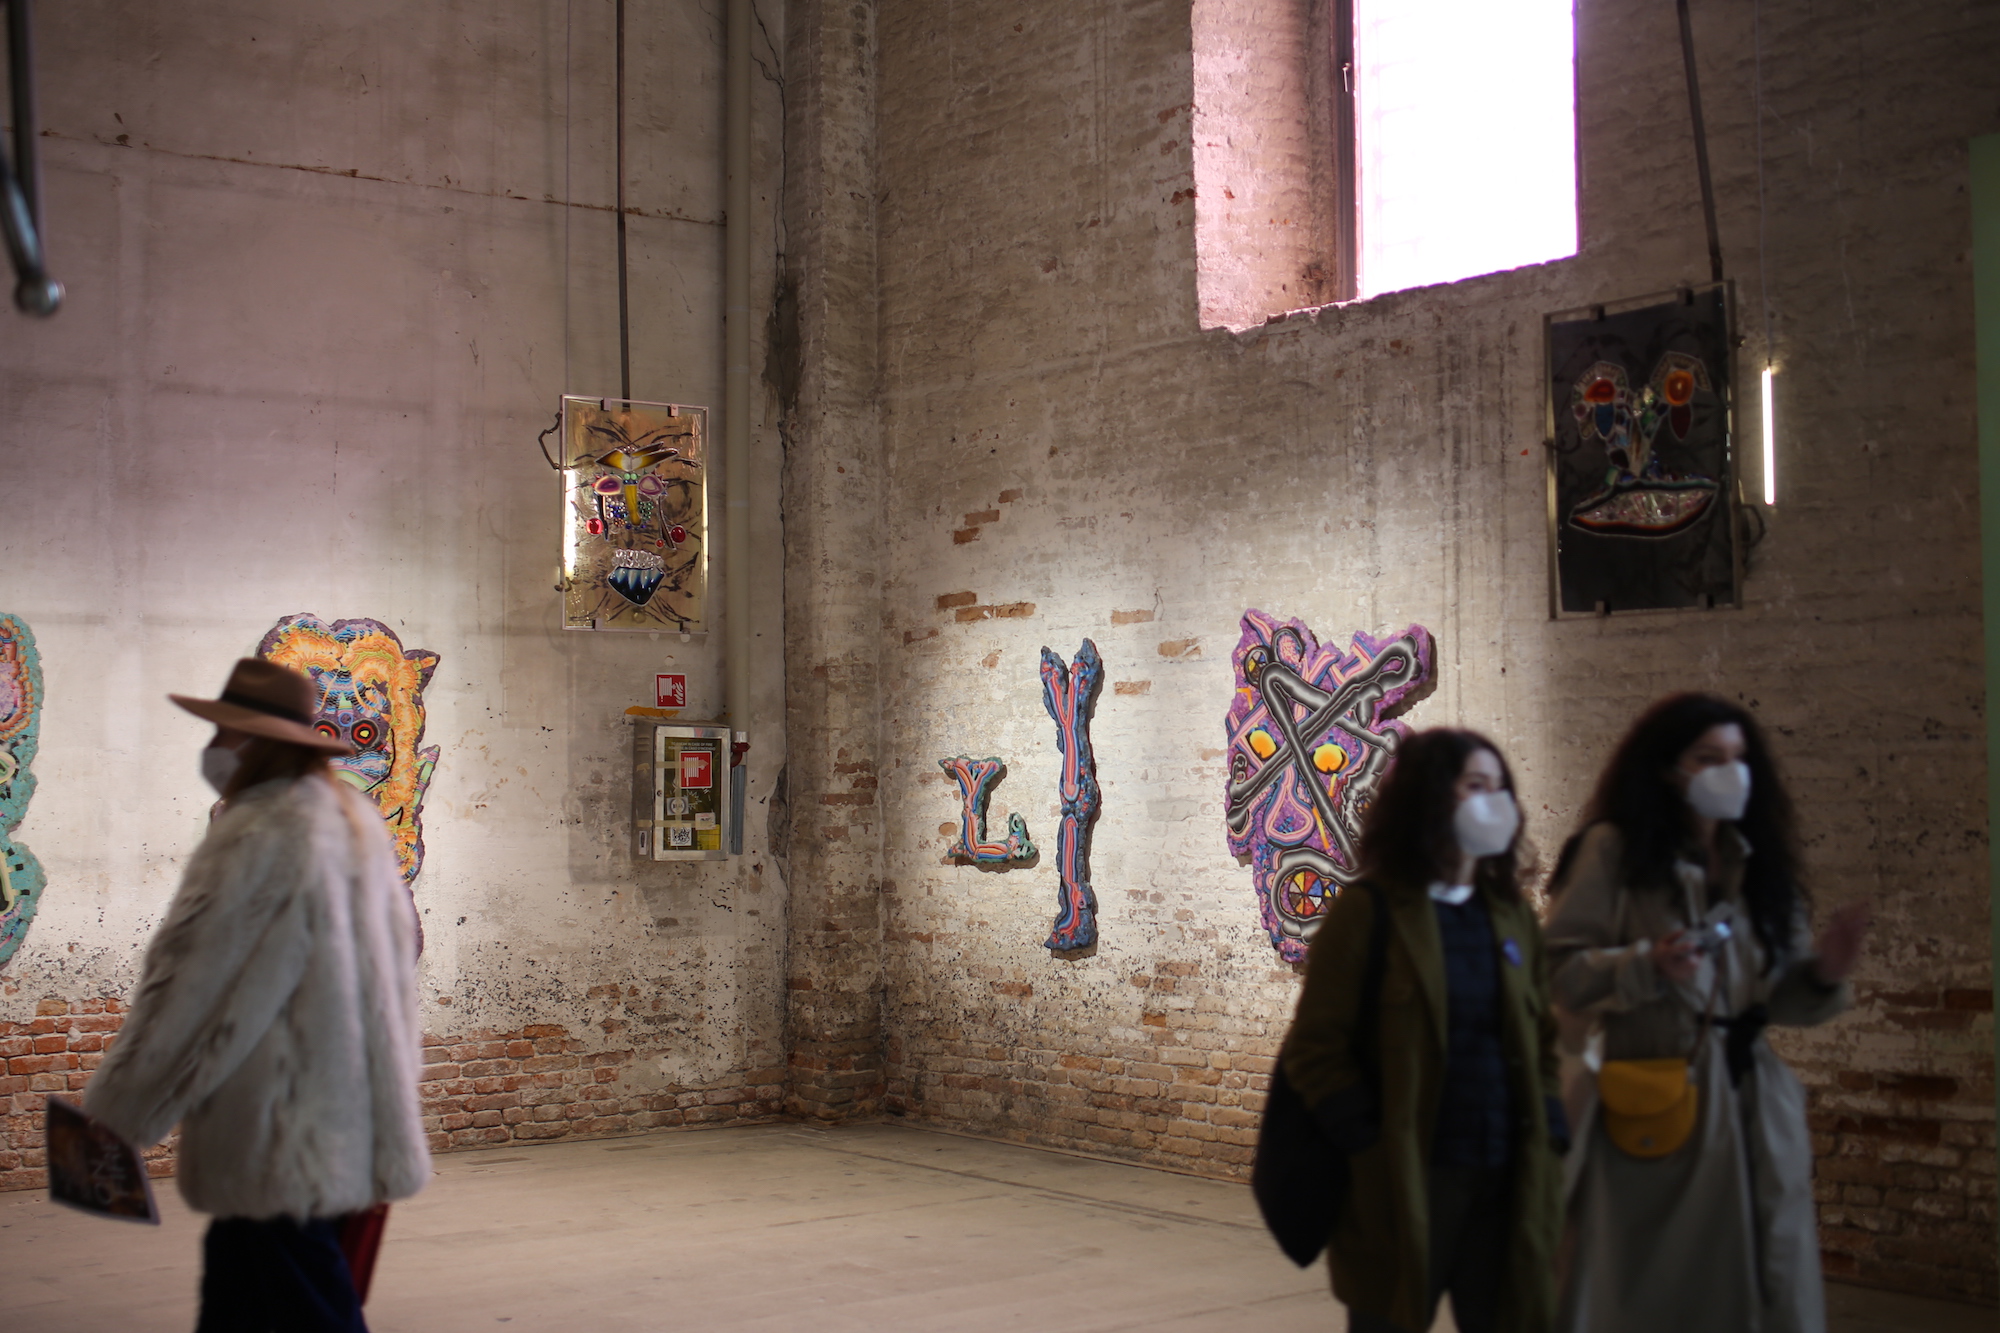 Visitors to the Venice Biennale in the Arsenale. Photo by Louise Benson